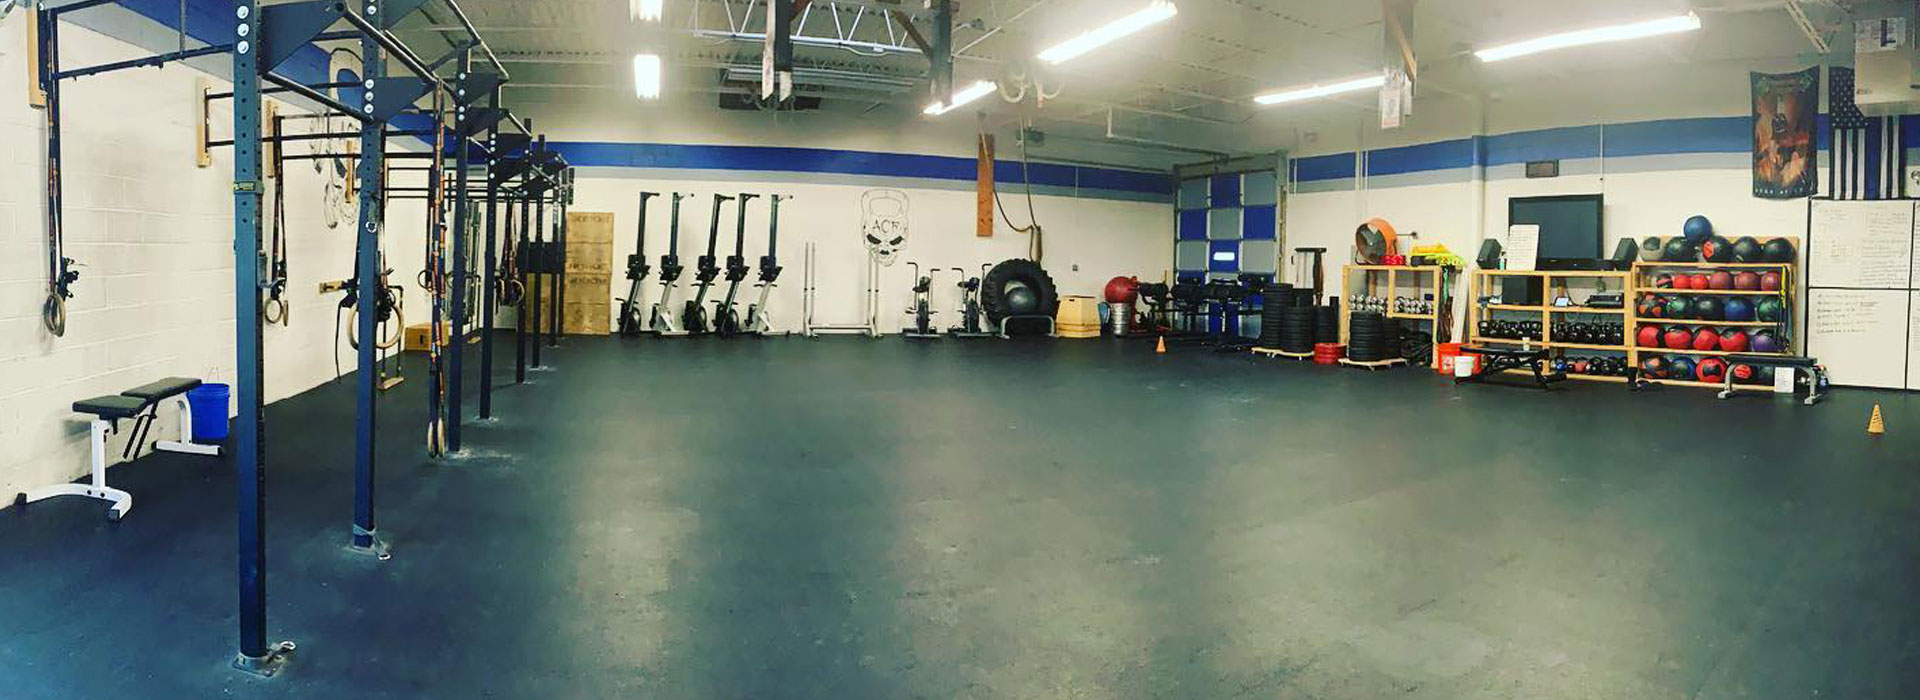 Top 5 Best Gyms To Join In La Grange, IL